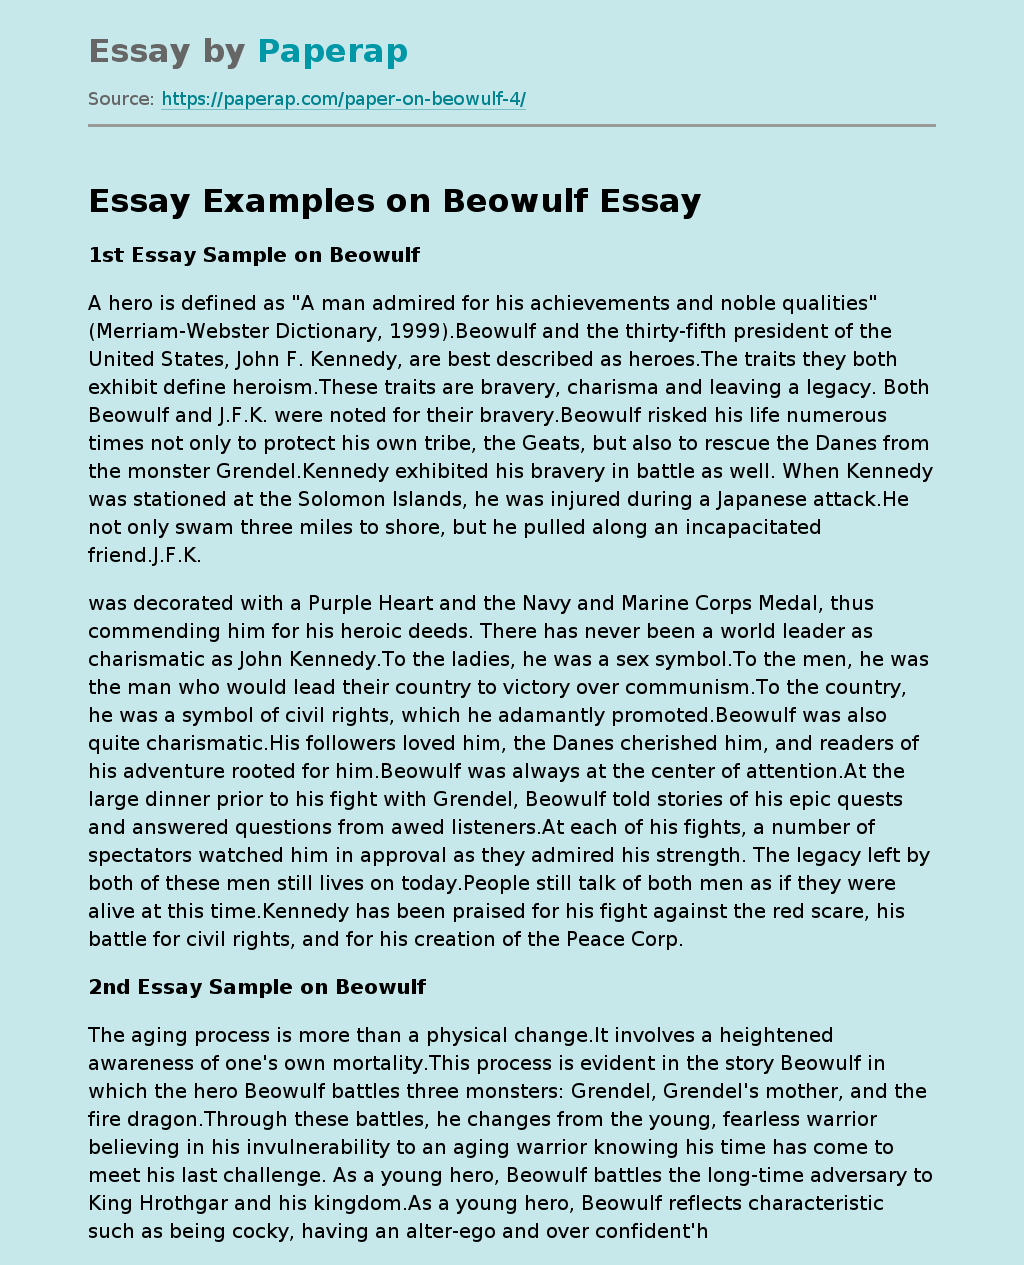 Essay Examples on Beowulf